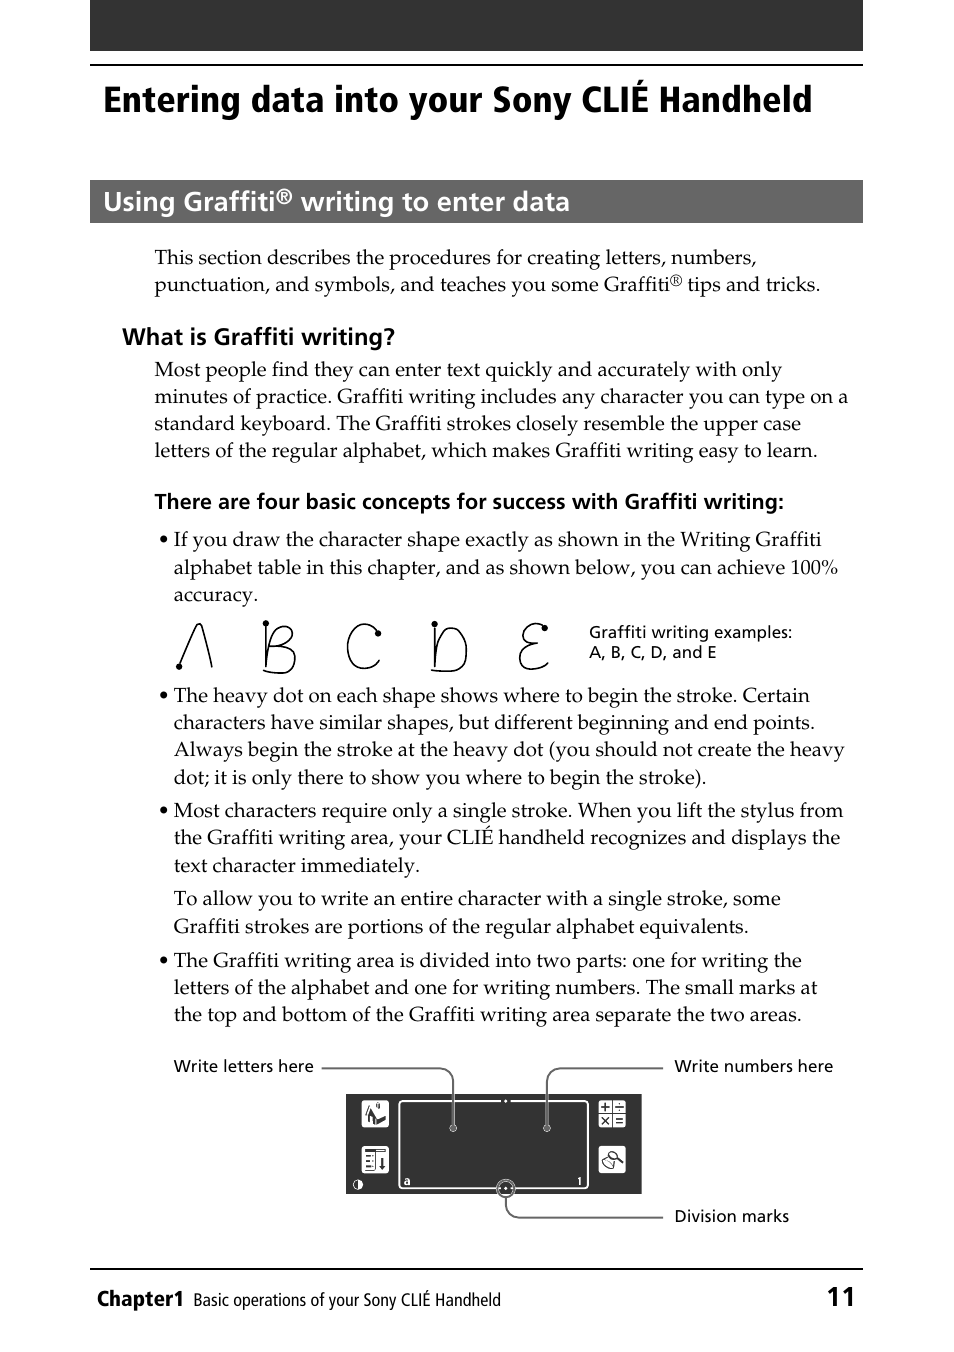 Entering data into your sony clié handheld, Using graffiti® writing to enter data, Using graffiti | Writing to enter data | Sony PEG-T415G User Manual | Page 11 / 220